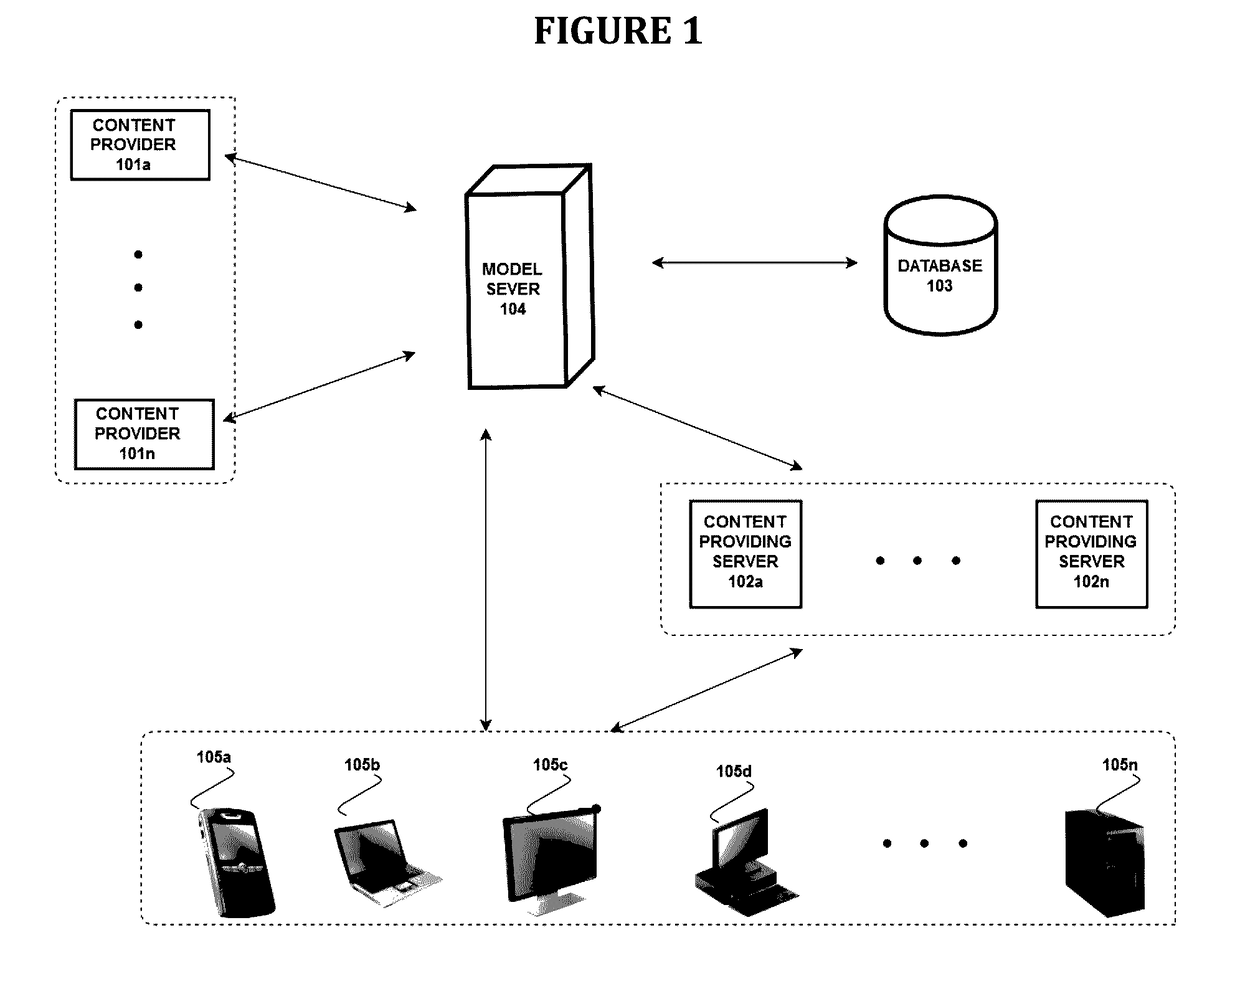 Device, method, and computer readable medium of generating recommendations via ensemble multi-arm bandit with an lpboost